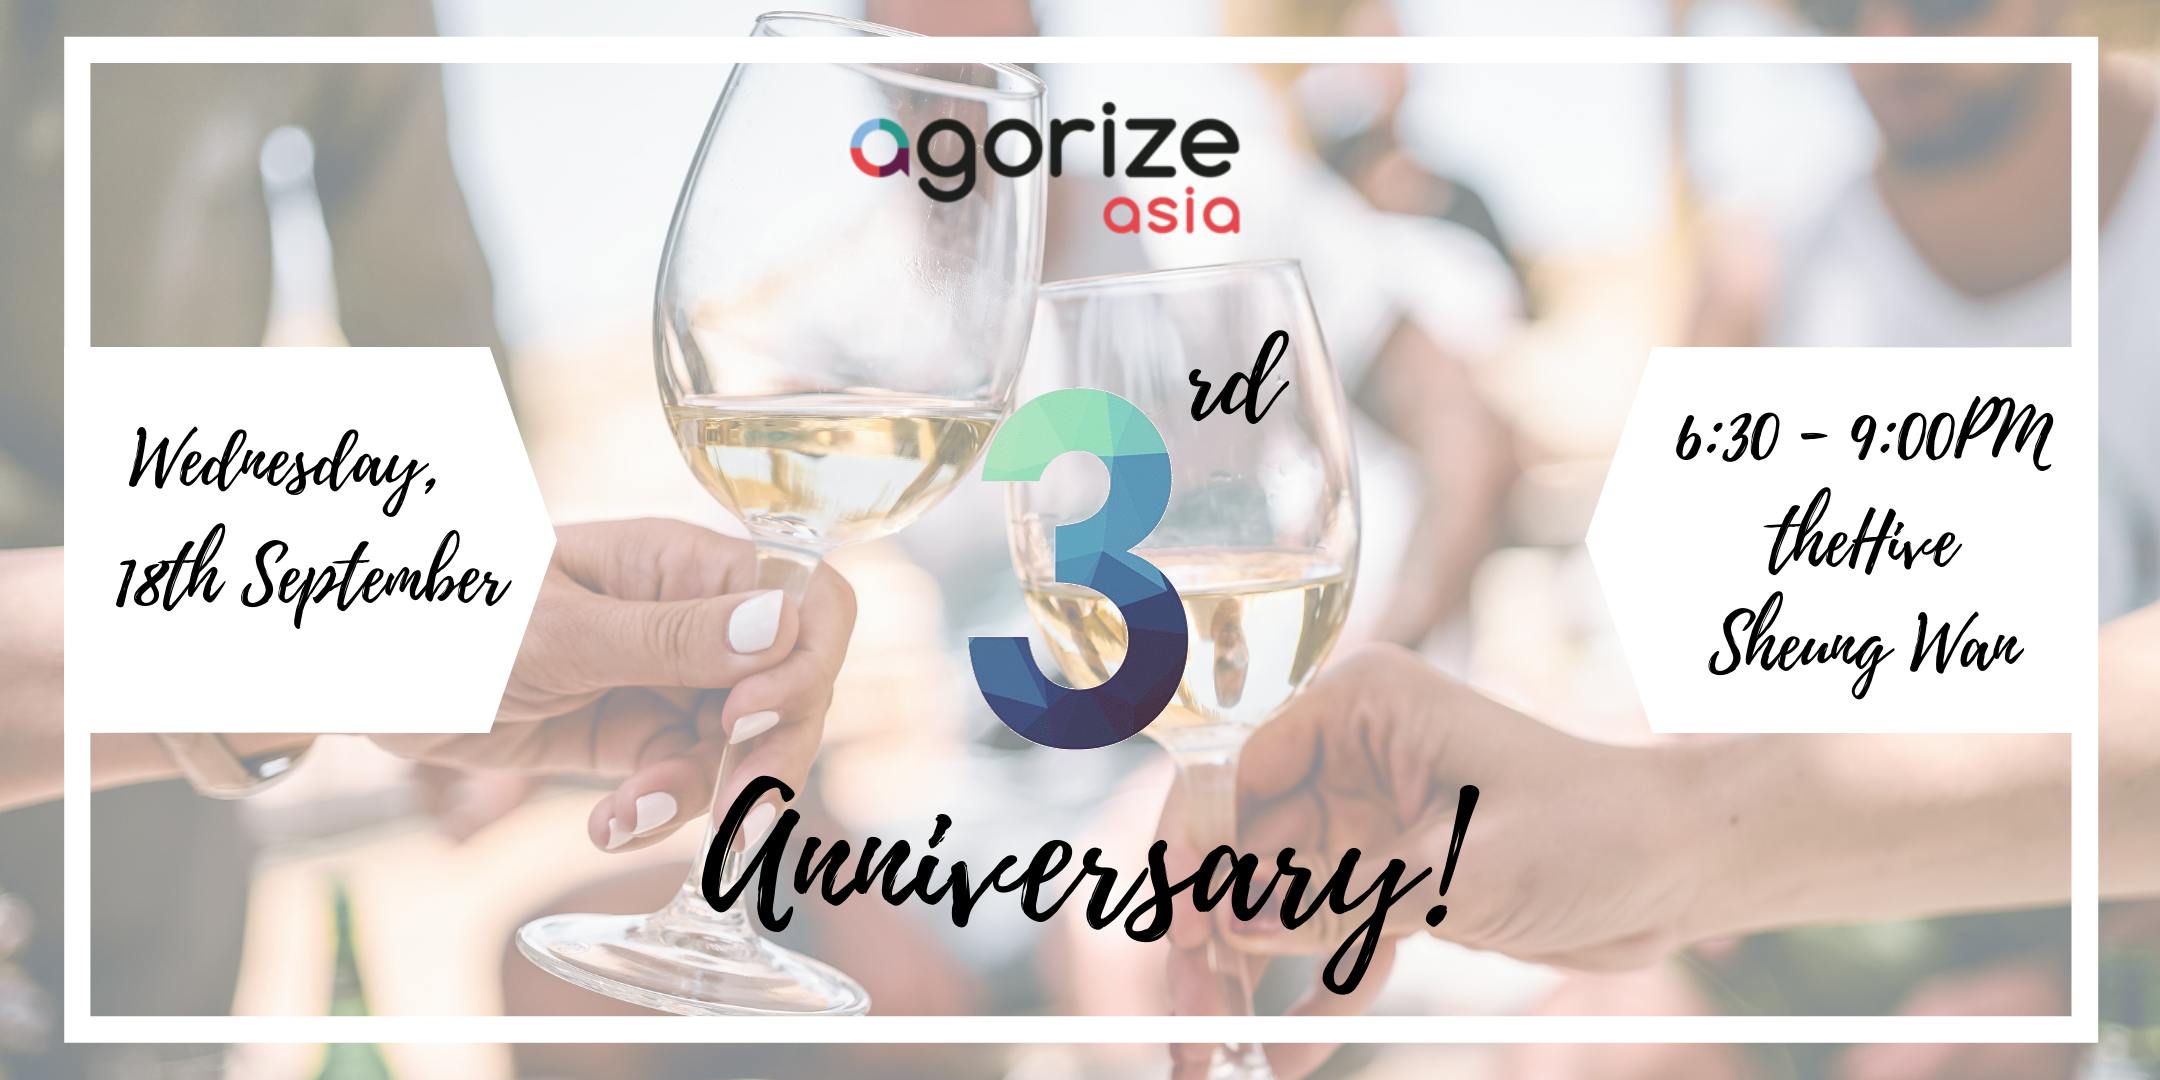 AGORIZE ASIA 3rd Anniversary!